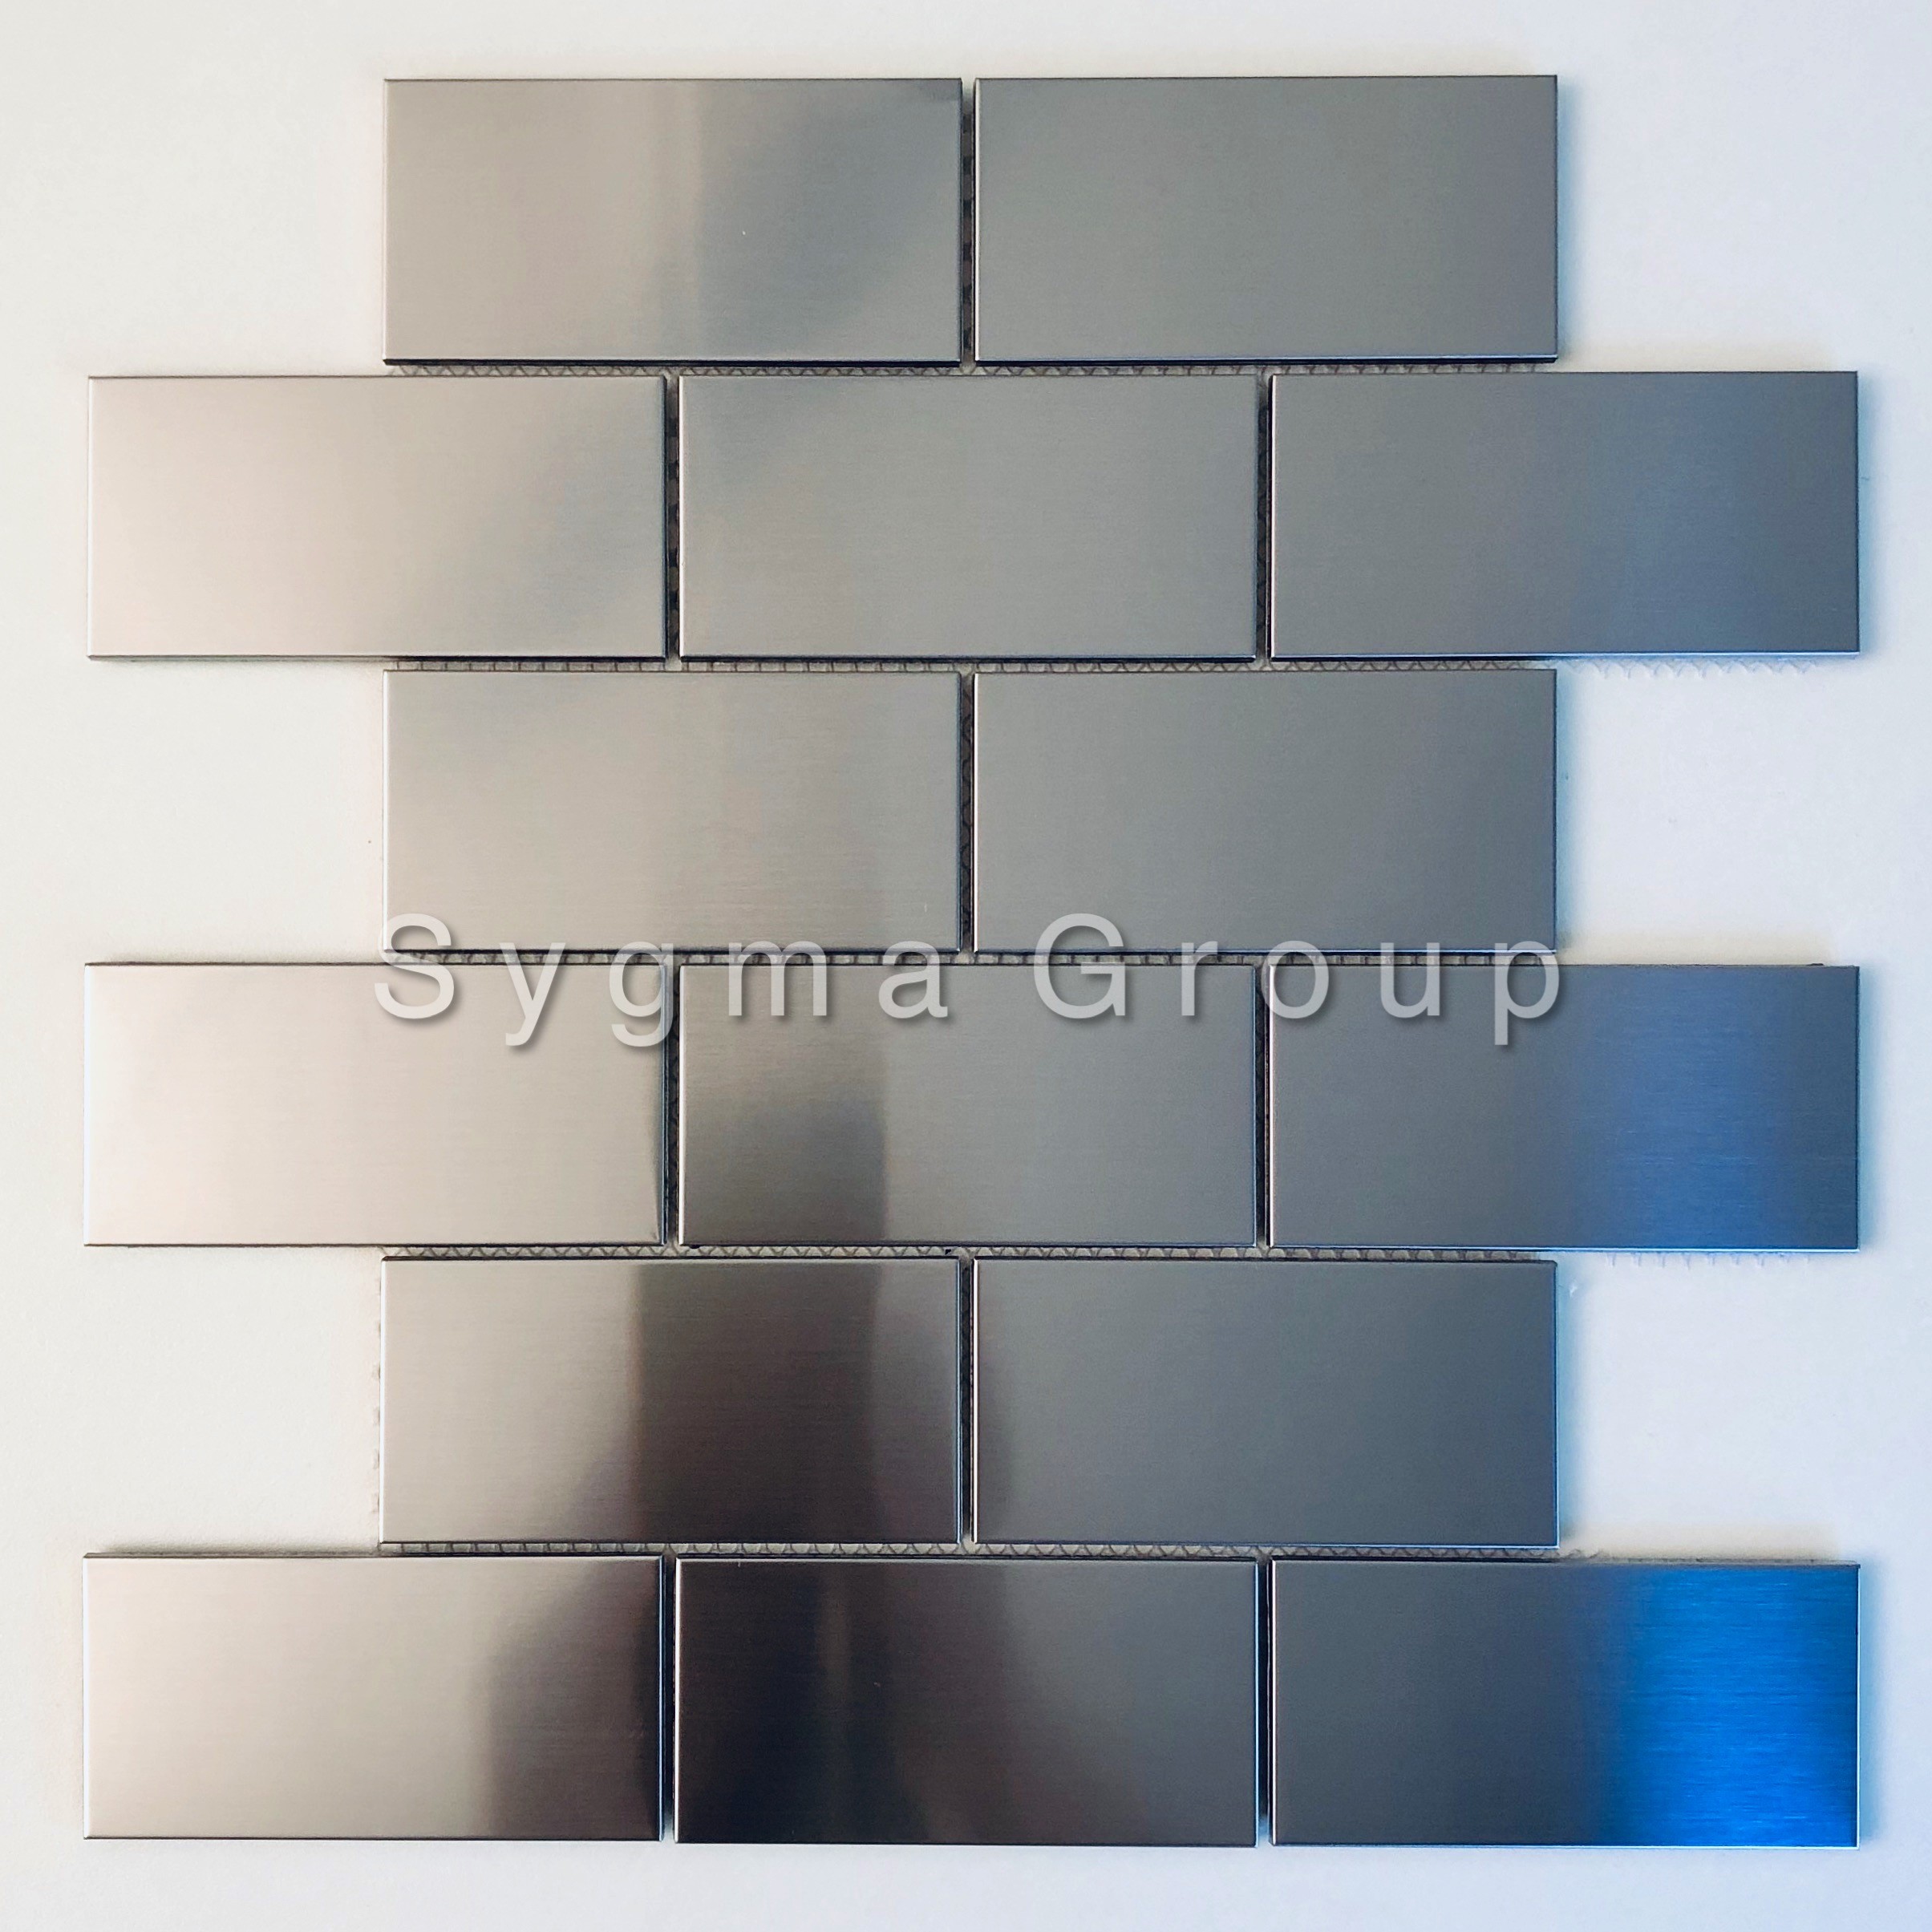 Where To Buy Stainless Steel Backsplash / 30 X 30 Quilted Stainless ...